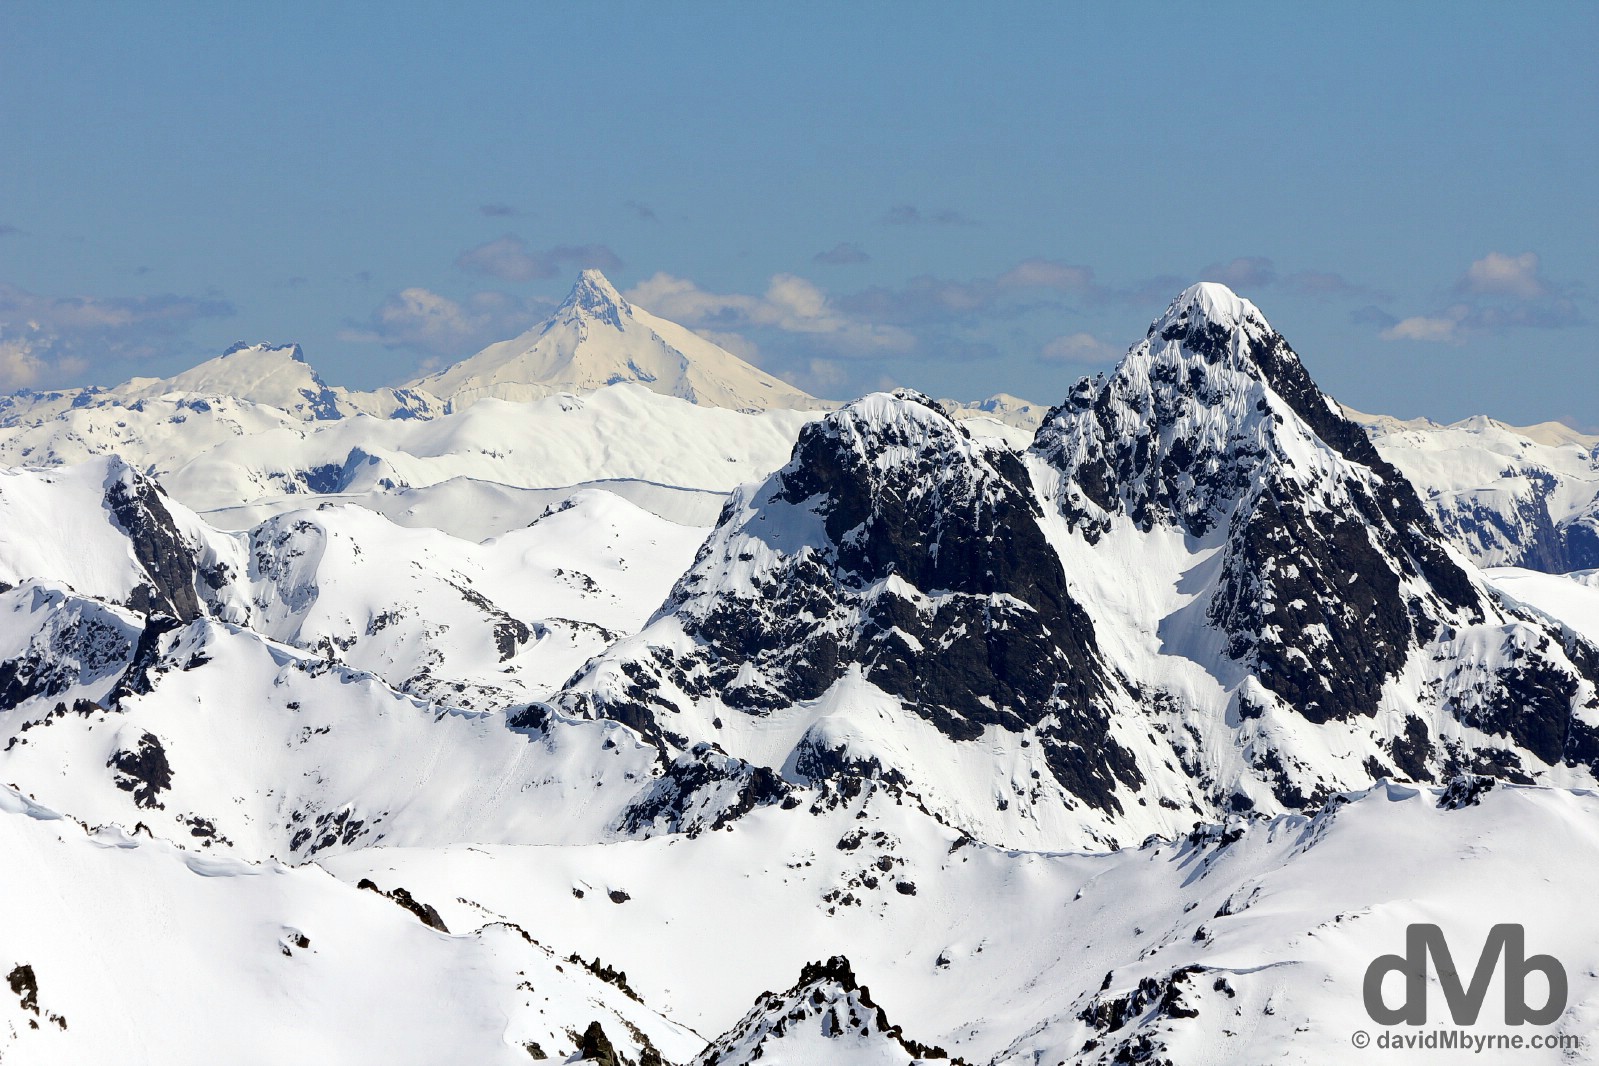 Patagonia peaks as seen from Cerro Catedral outside Bariloche, Argentina. October 16, 2015.